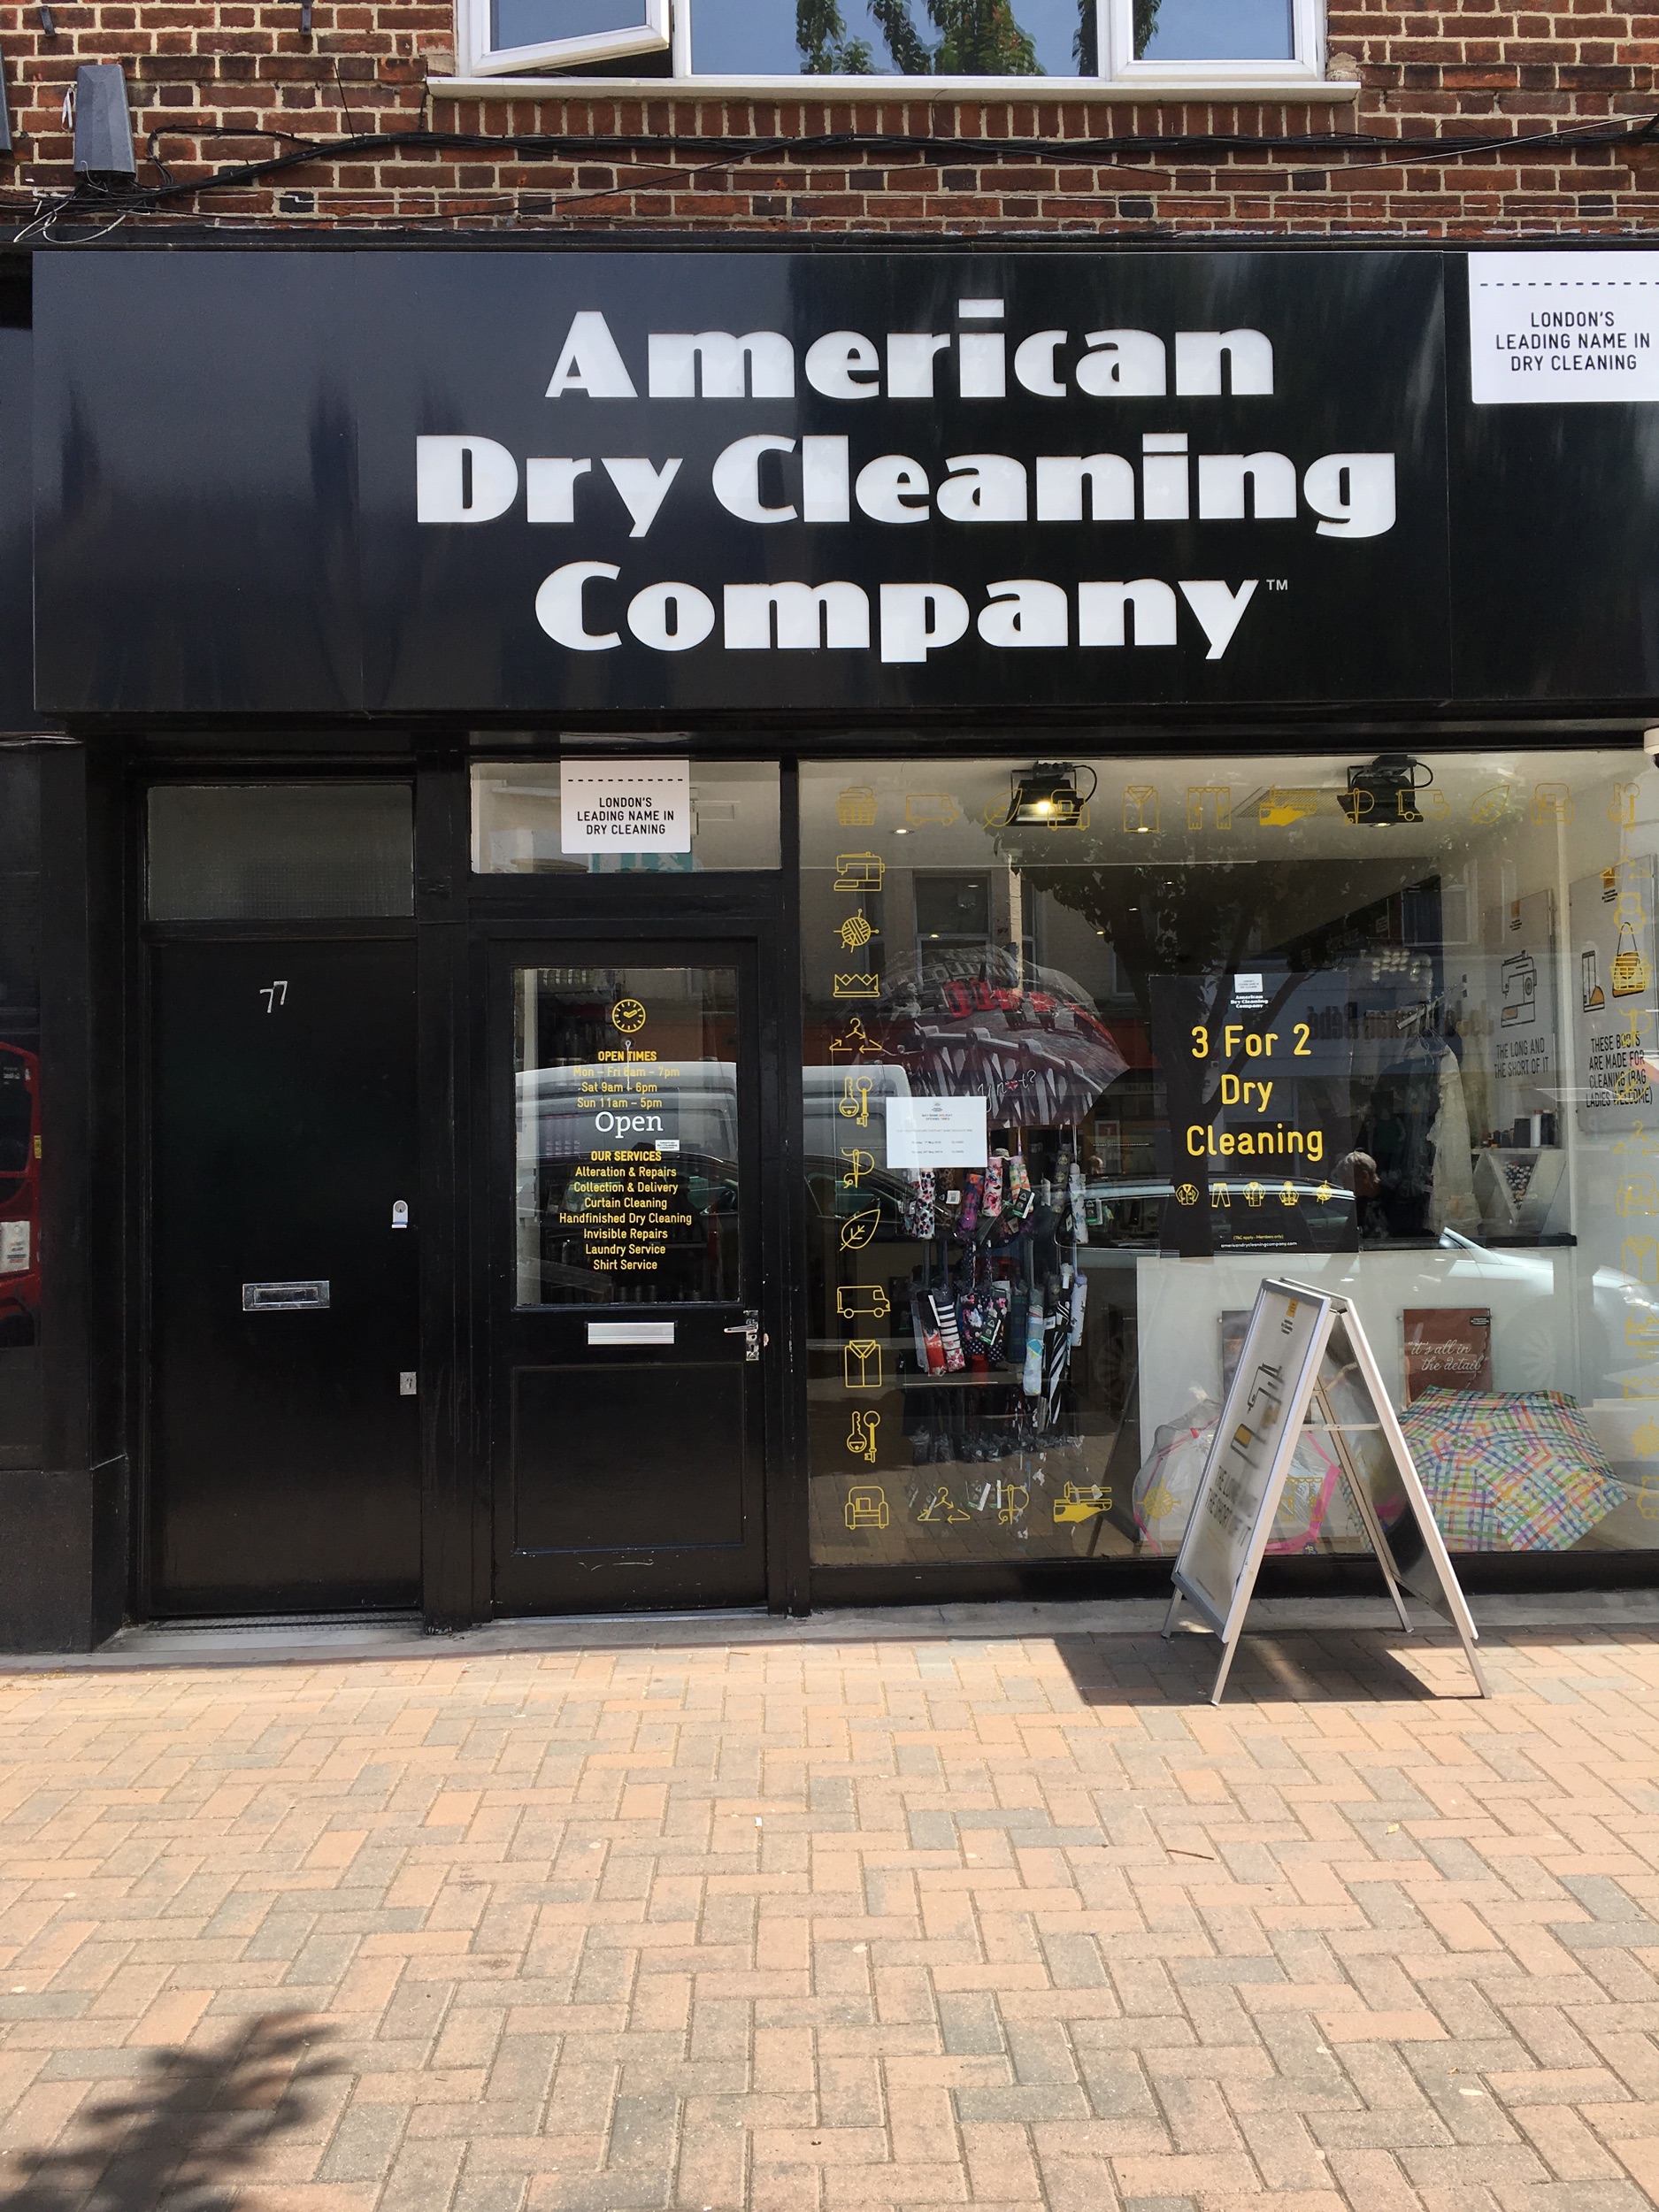 American Dry Cleaning Company Clapham Junction London